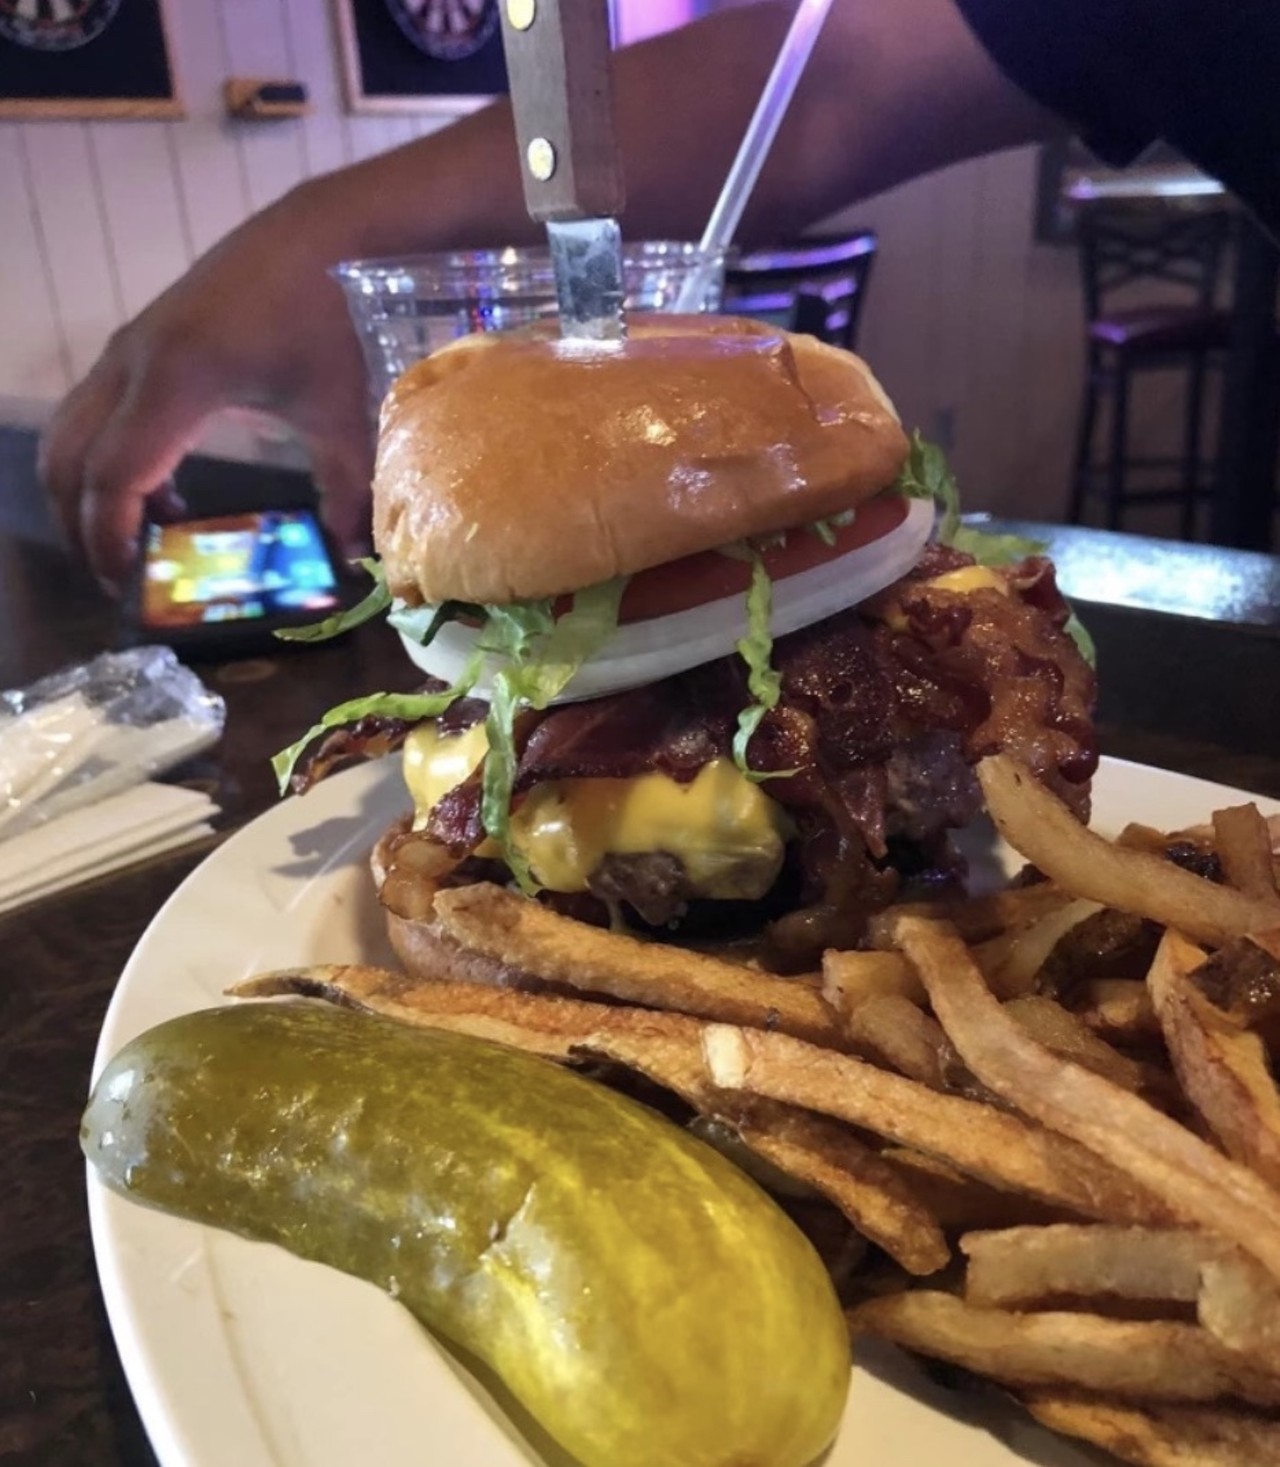 49TH STREET TAVERN
49th Street Burger: 10oz hand-formed patty cooked to your liking topped w/ lettuce, tomato, and onion on a brioche bun. Served with homemade chips and a pickle.
BREW KETTLE SPECIAL: Burger and Brew Kettle Beer for $10